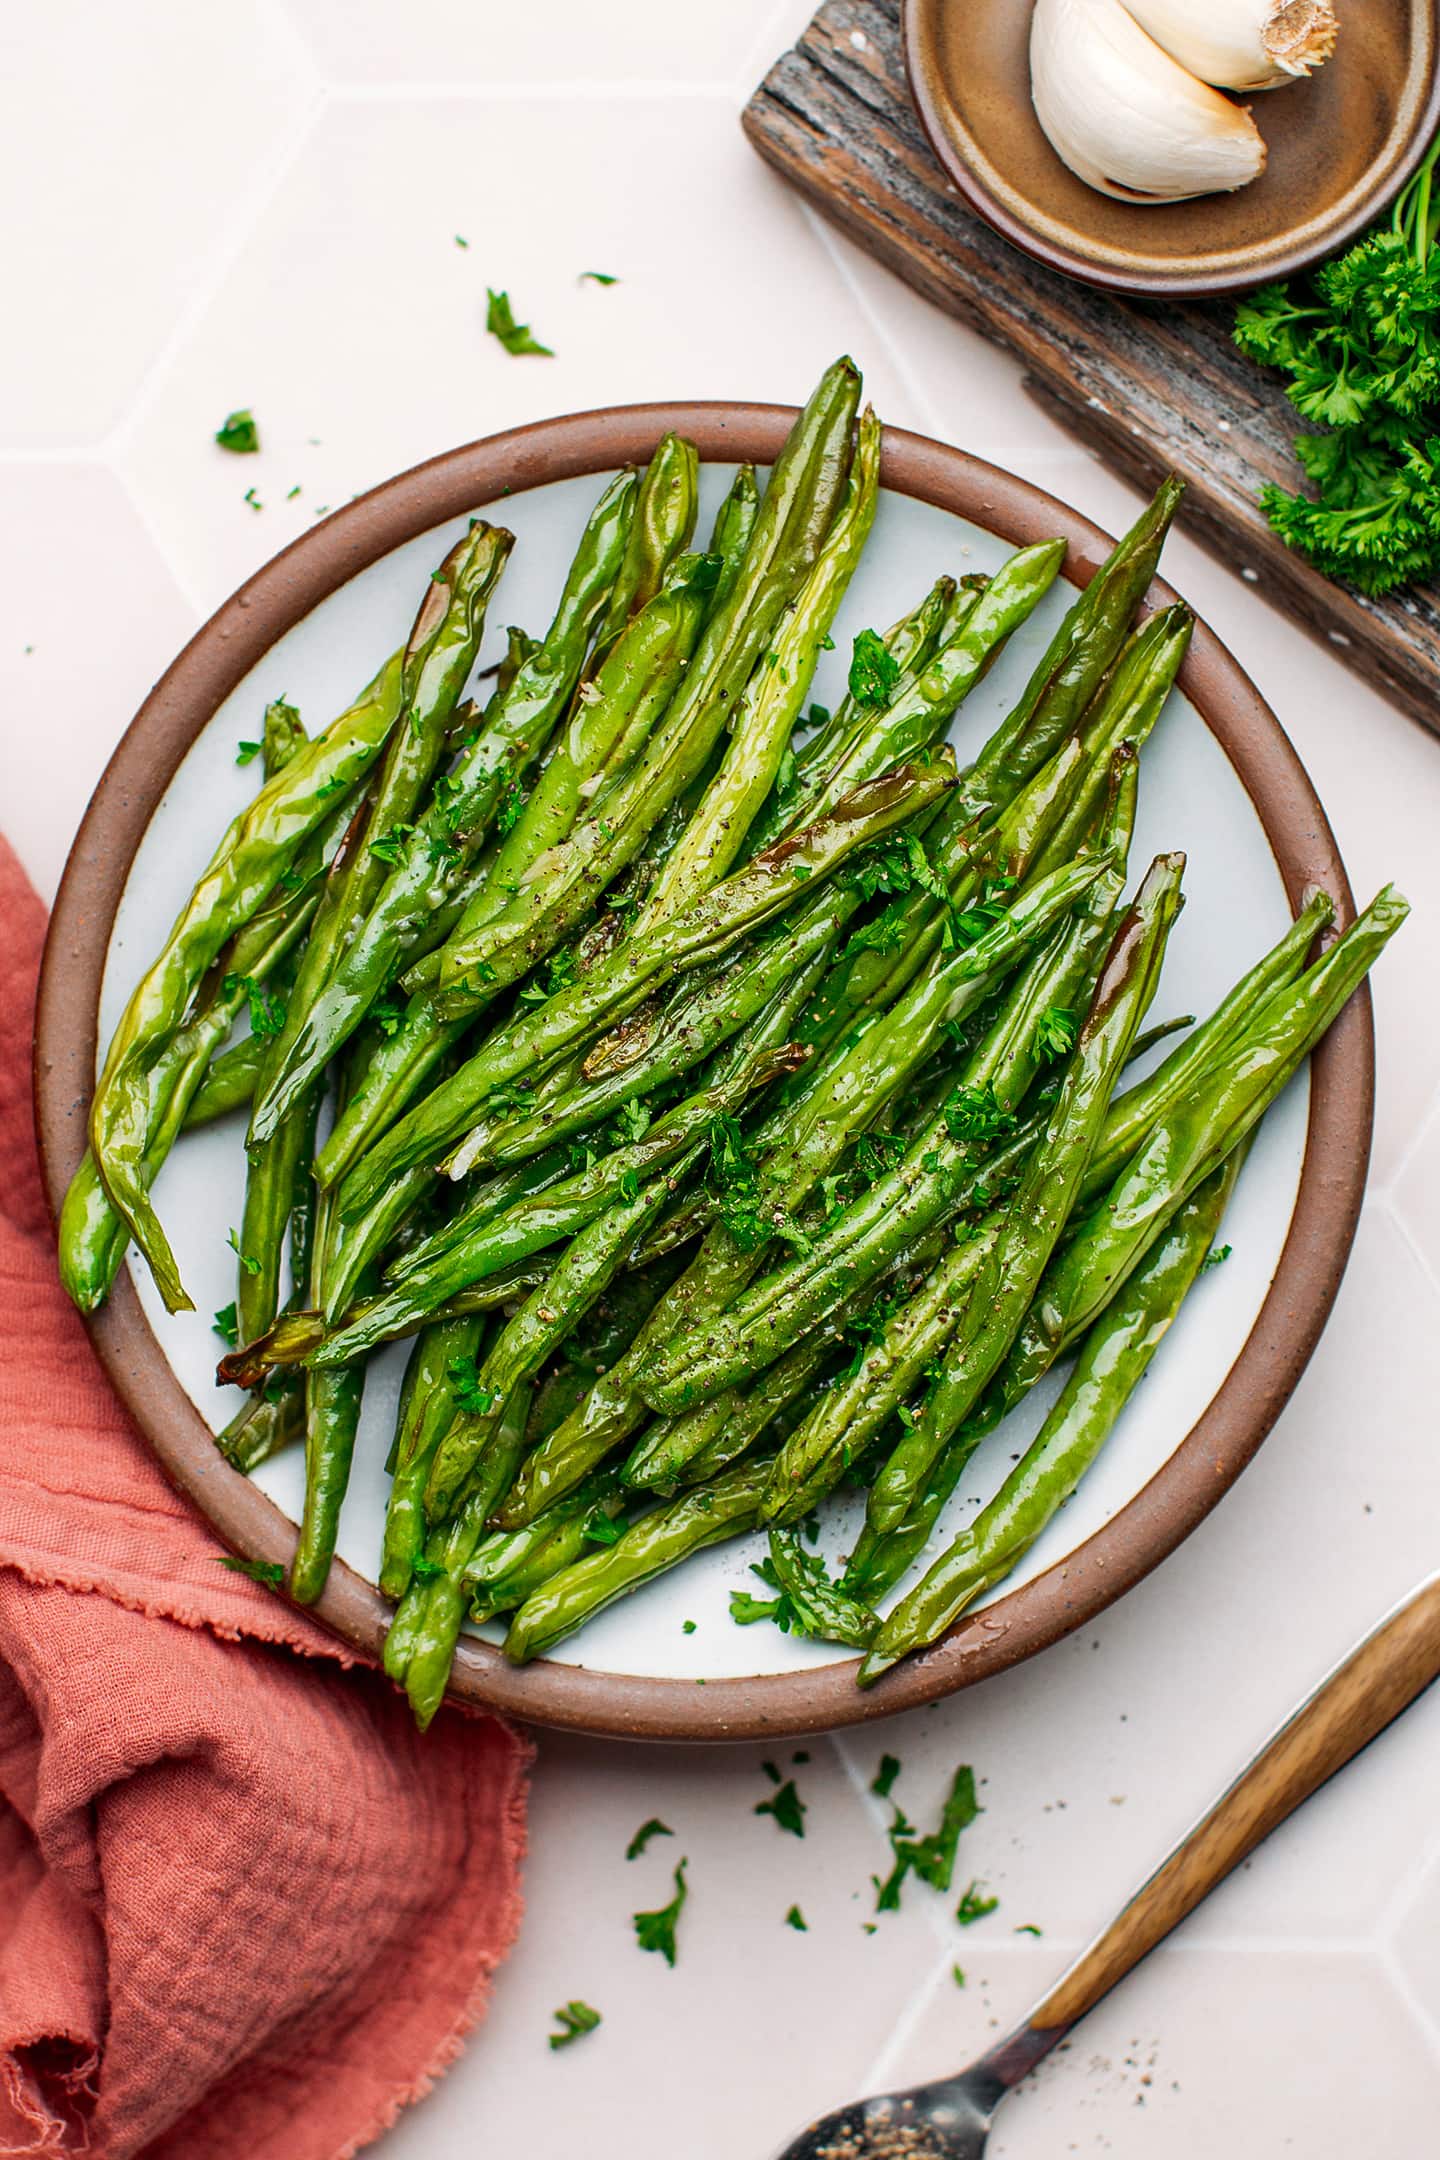 Cooked green beans topped with black pepper on a plate.